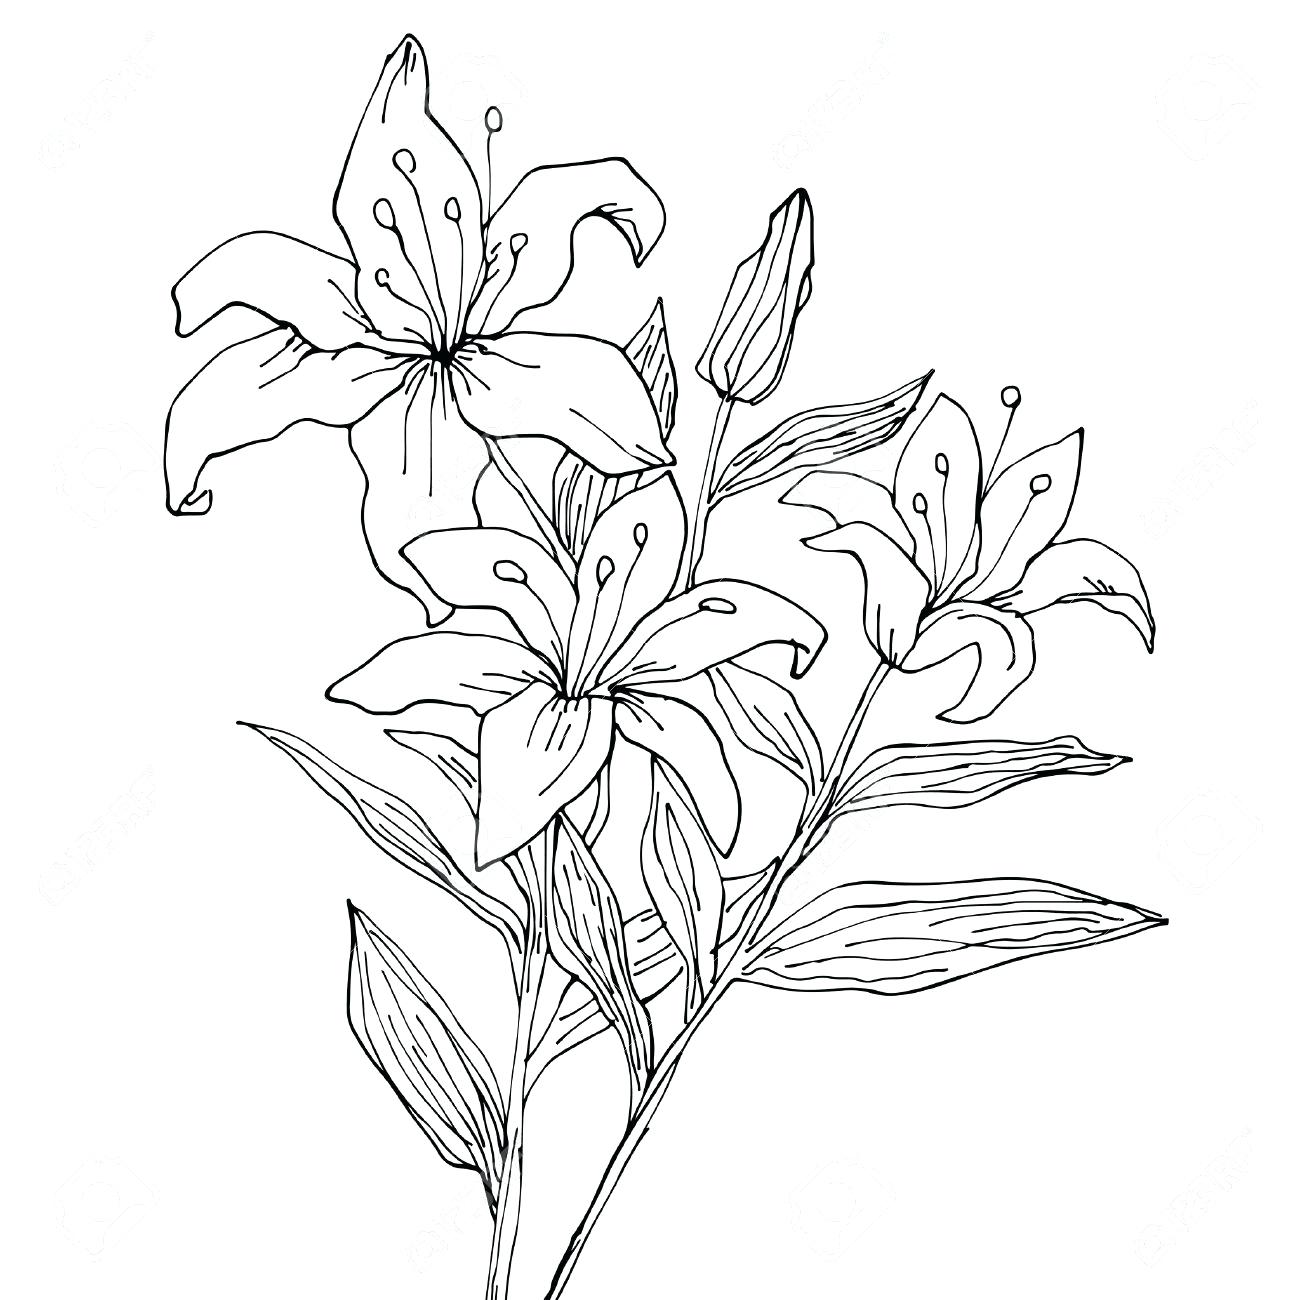 How To Draw Tiger Lily Flower : Hand drawn sketch flowers tiger lilies ...